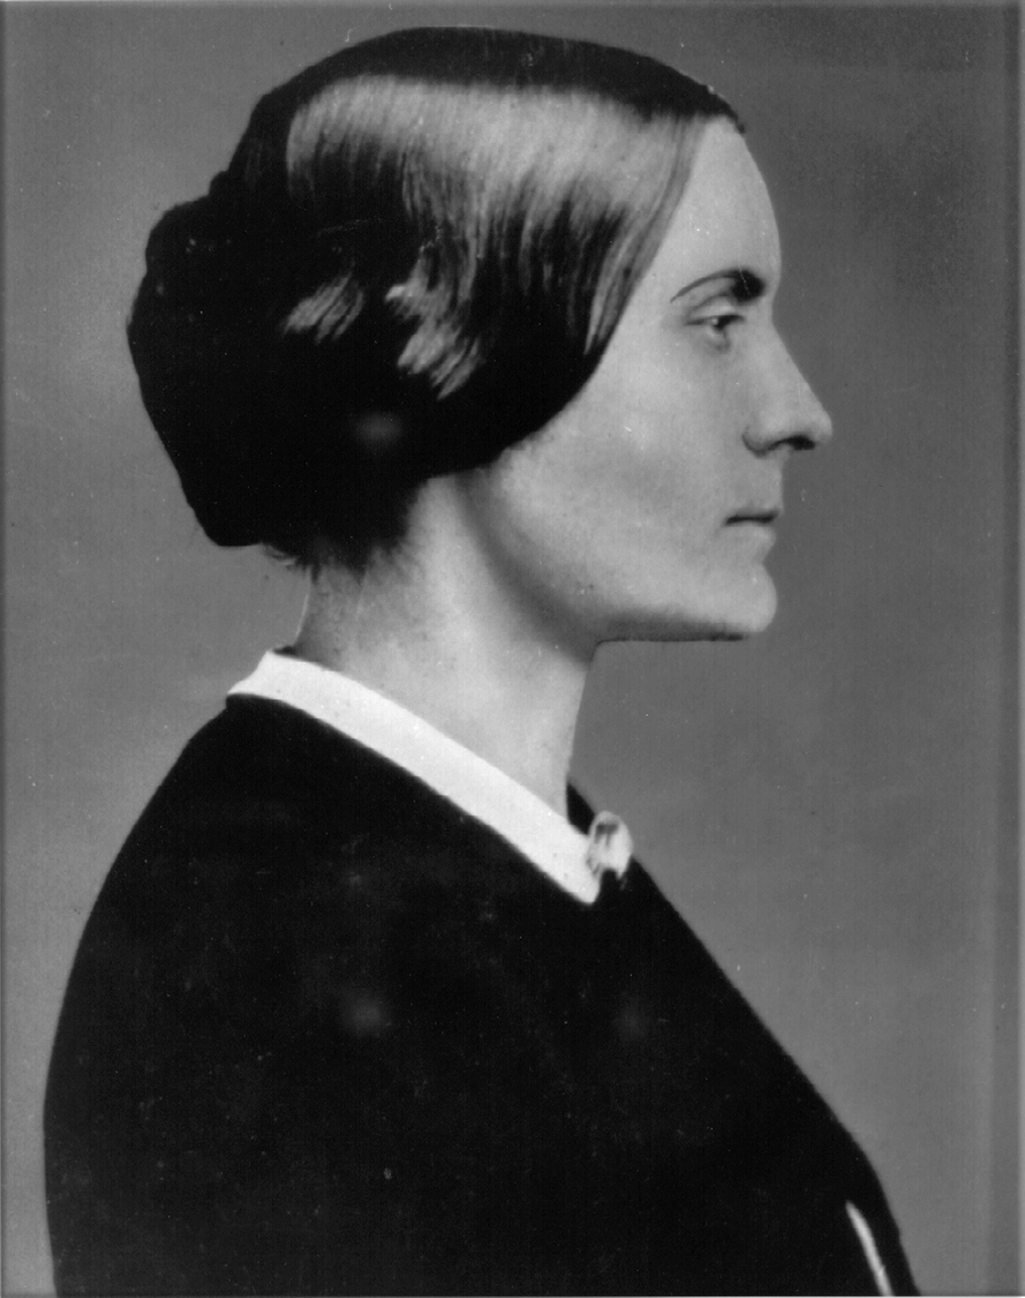 Susan B. Anthony is fined $100 for attempting to vote in the 1872 presidential election